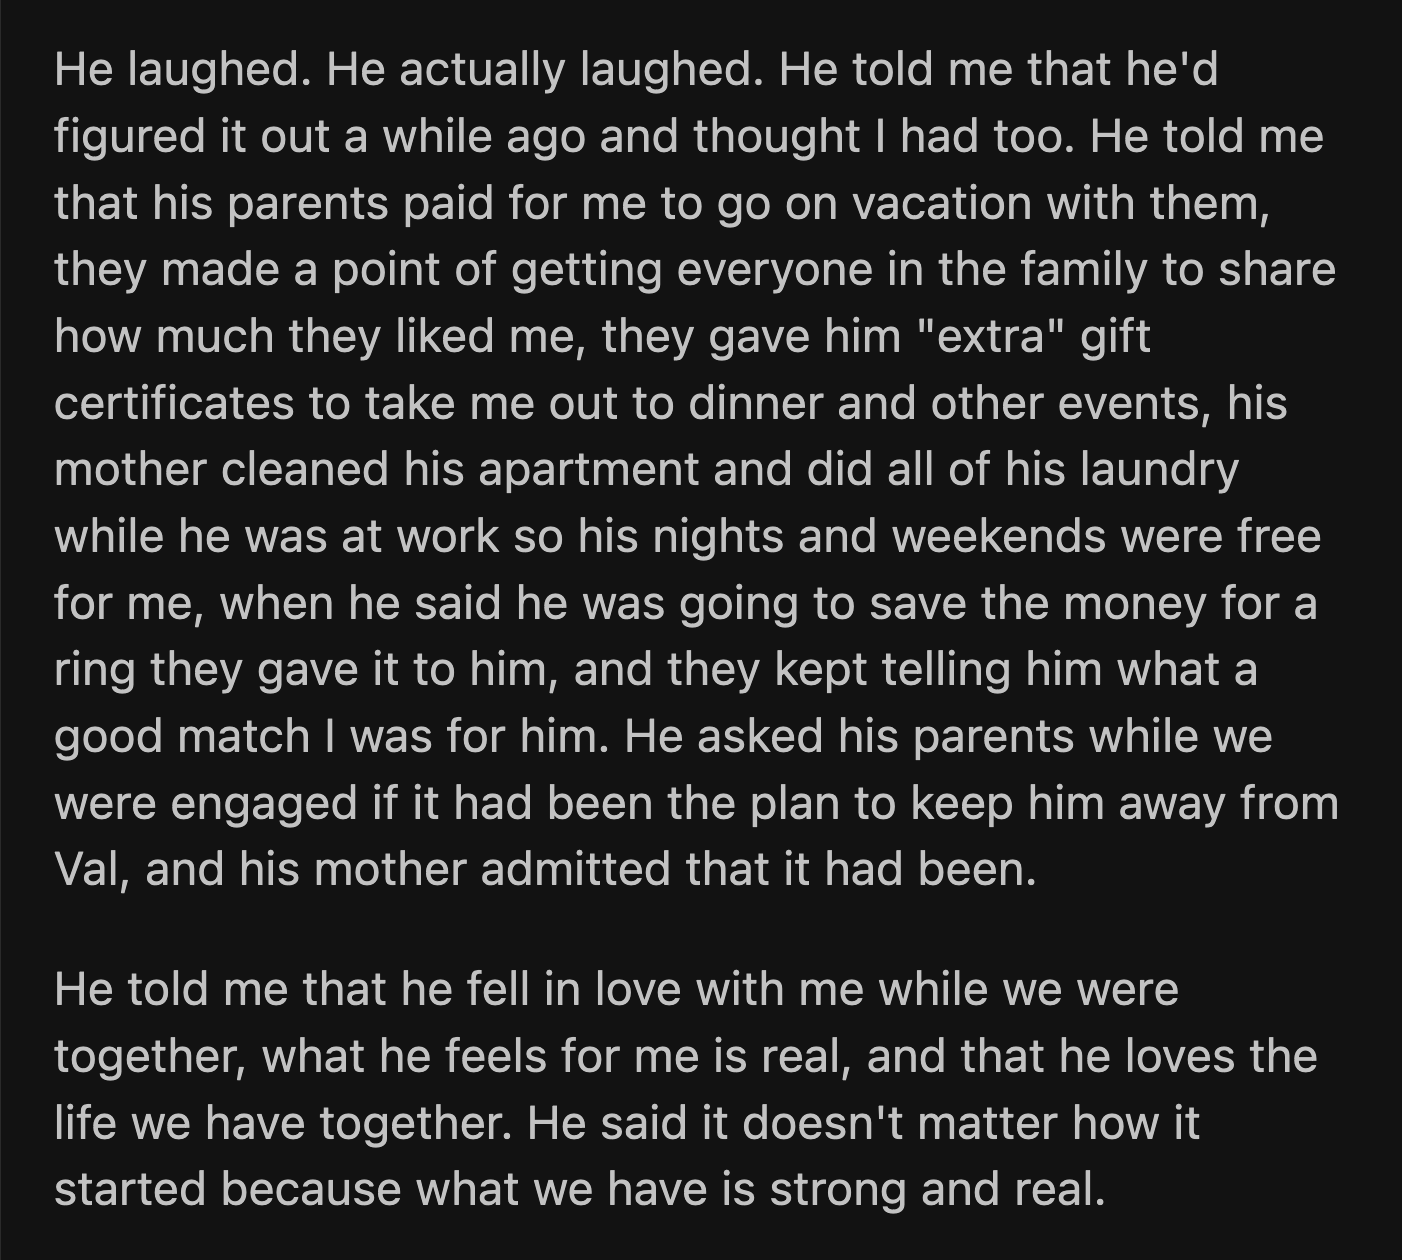 OP told her husband about what her parents said, and he laughed. OP's second shock of the day. Her husband knew about the arrangement and thought she knew as well. Their parents orchestrated everything to make them fall in love quickly.